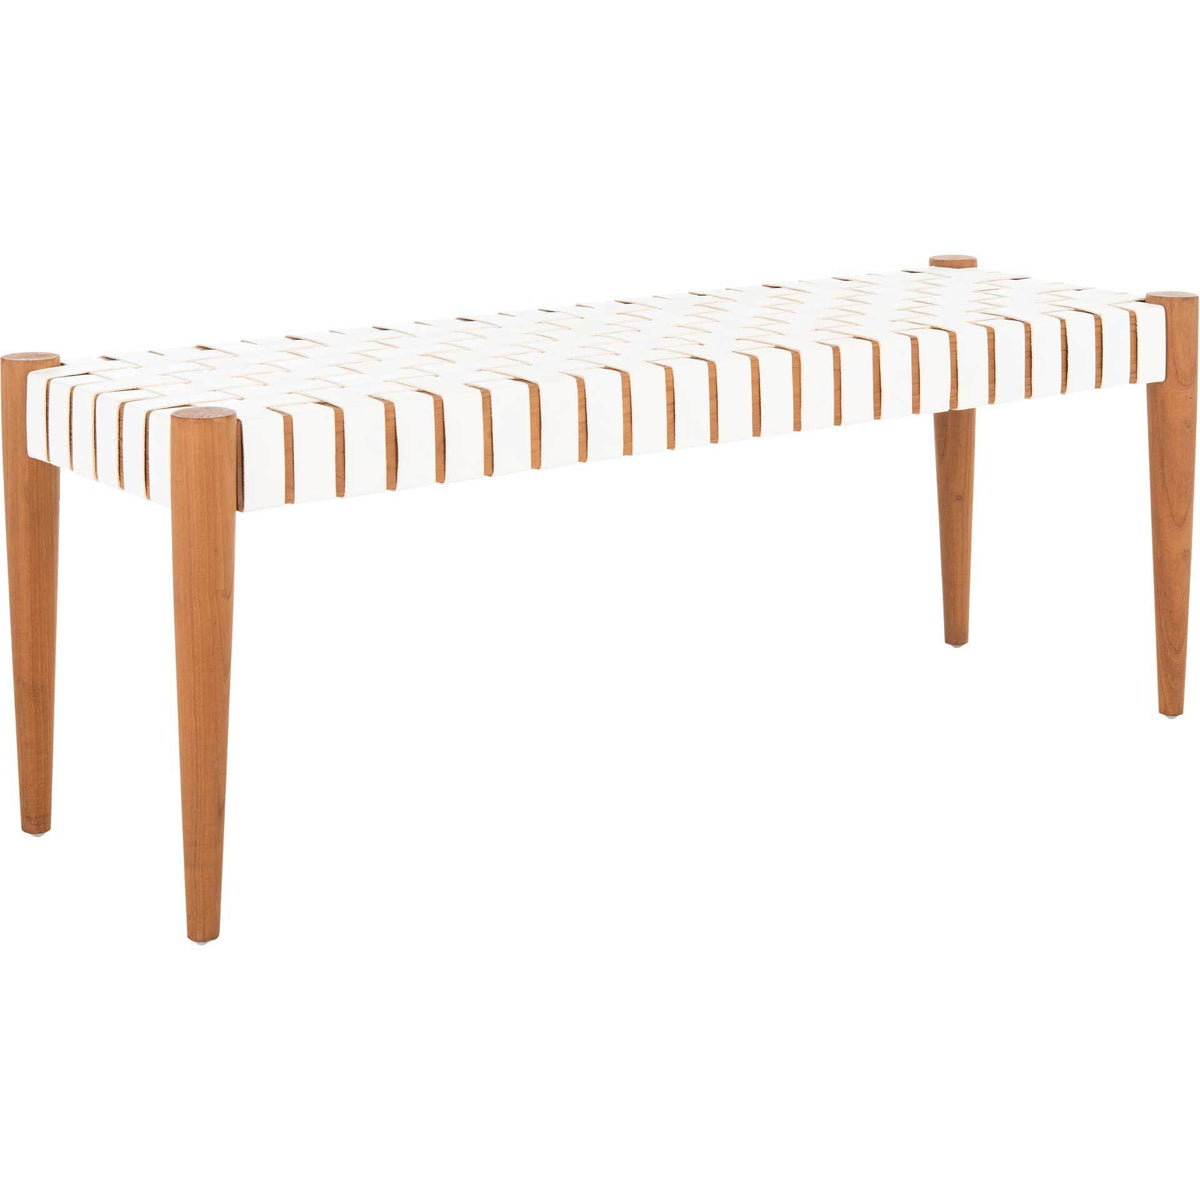 Amos Leather Weave Bench White/Natural